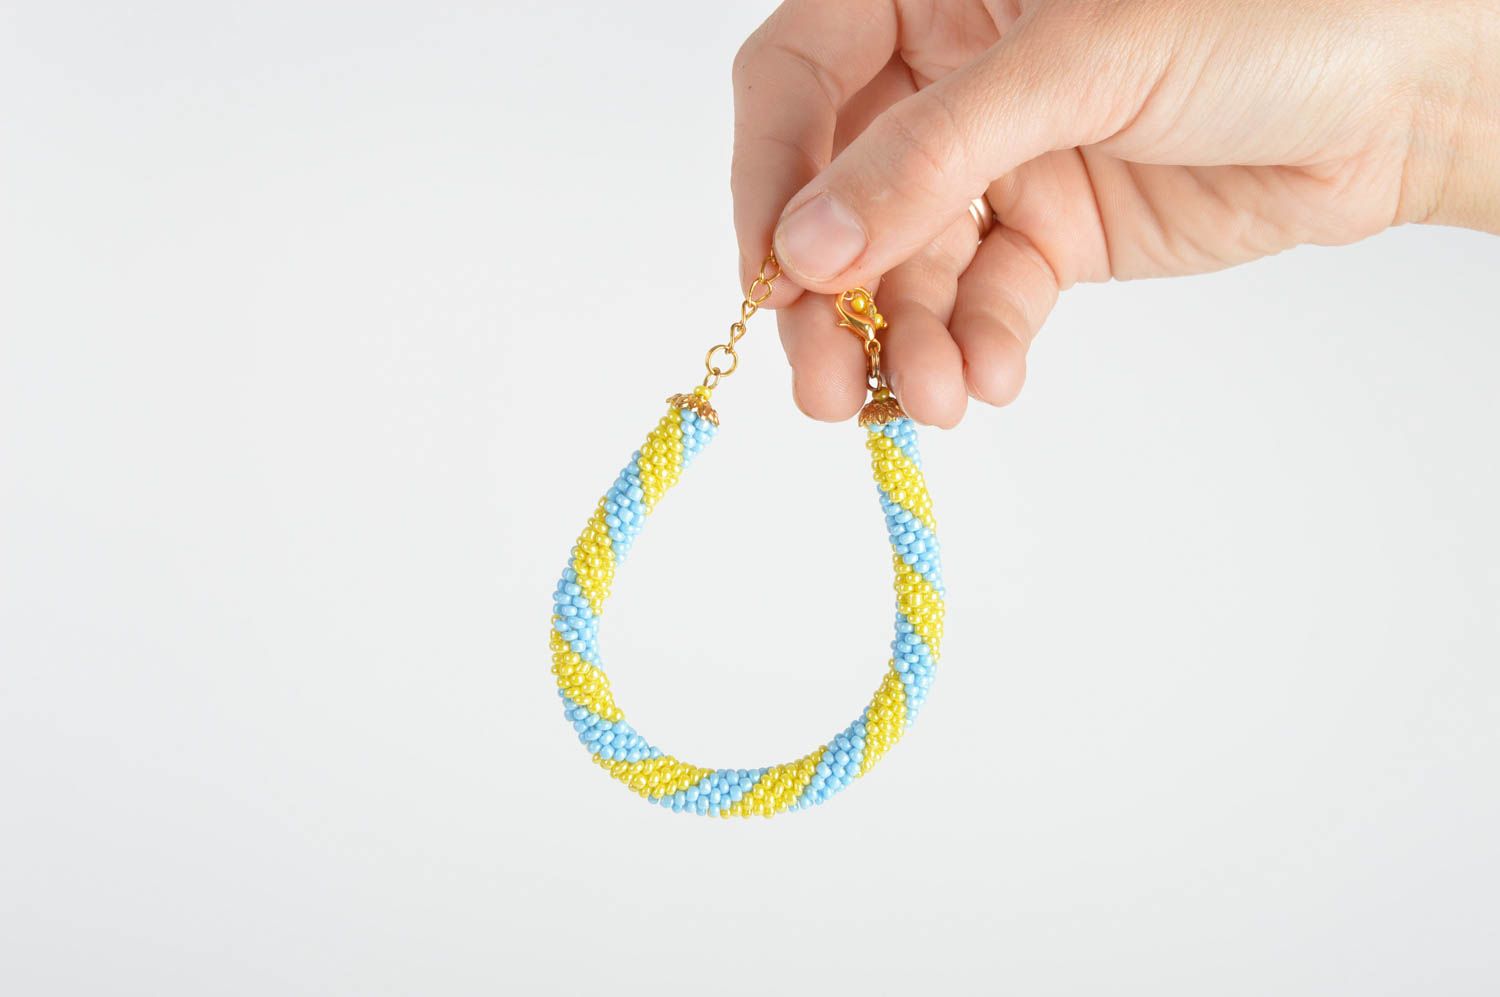 Handmade beaded cord wrist bracelet in blue and yellow colors for women photo 4